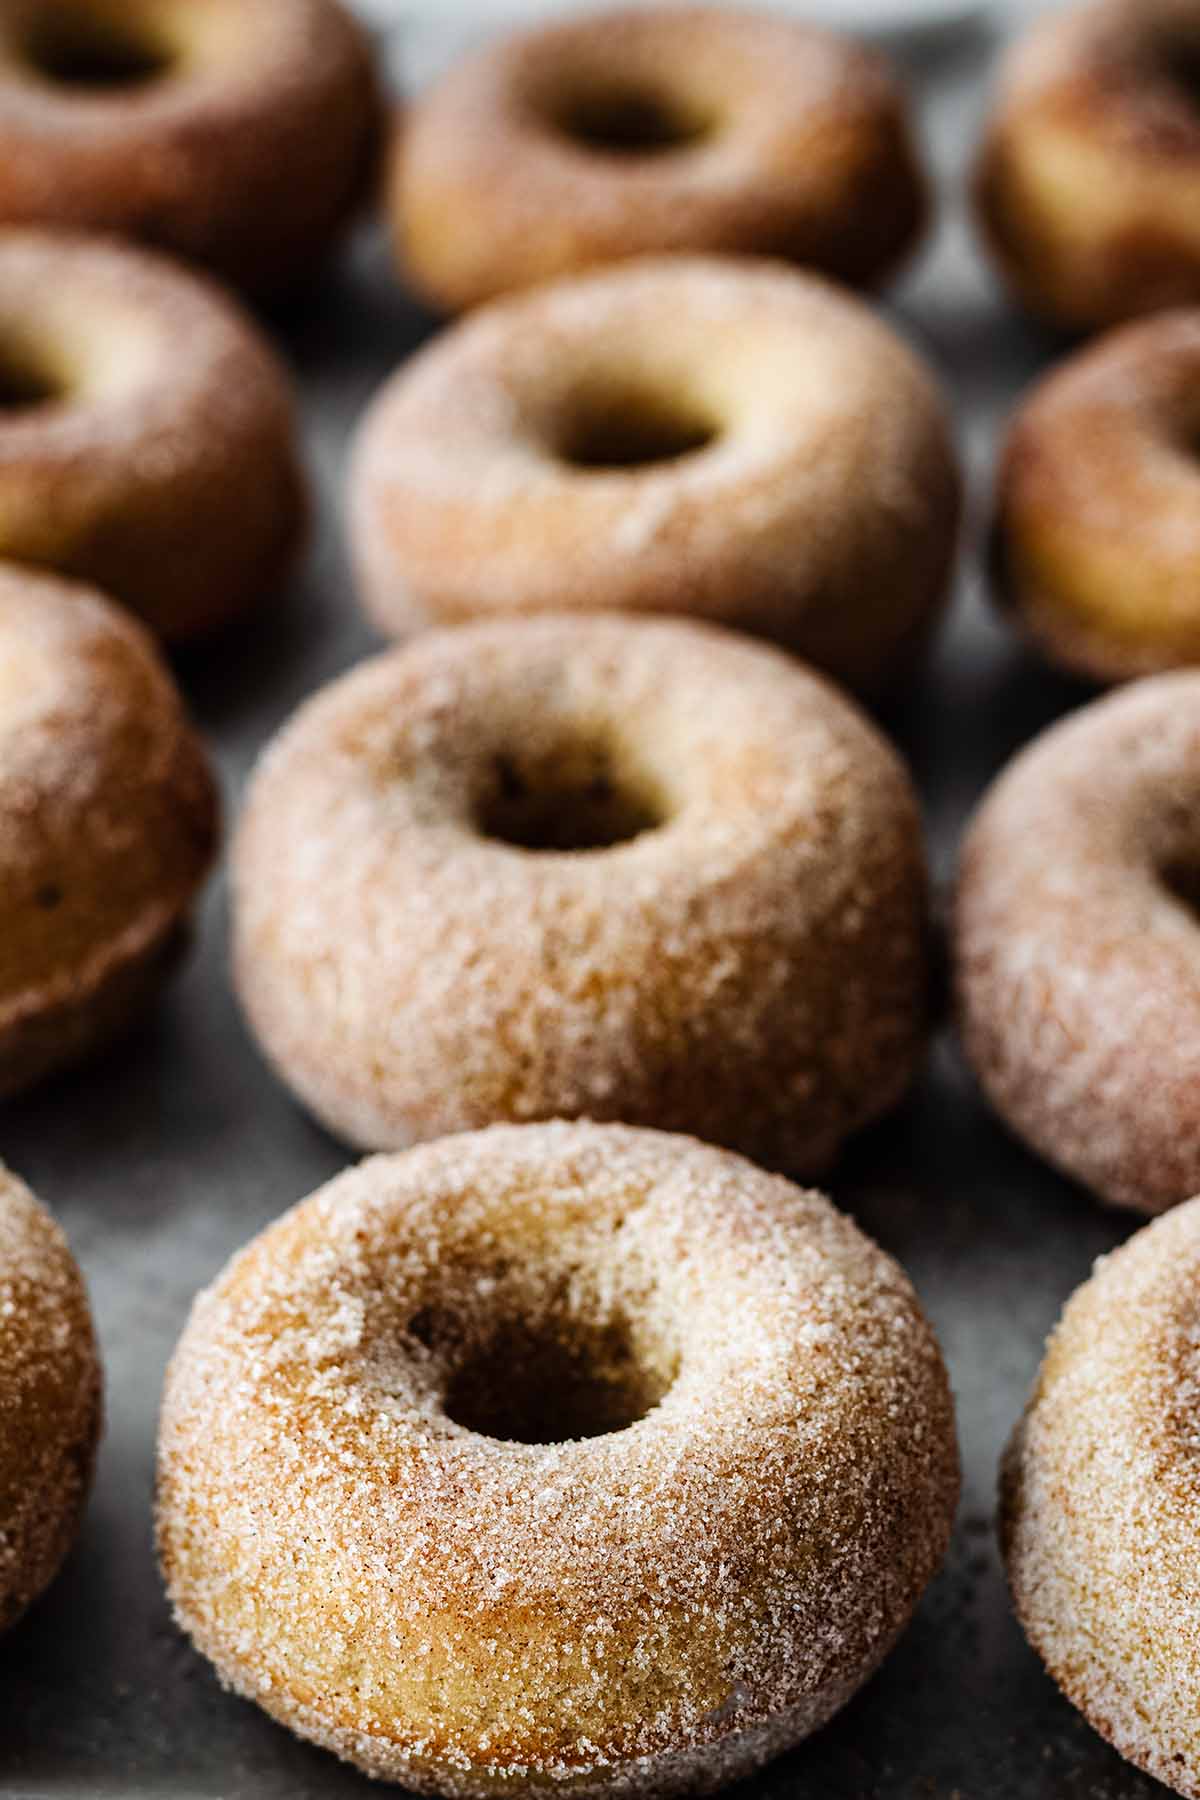 Gluten free apple cider donuts lined up on a baking sheet.